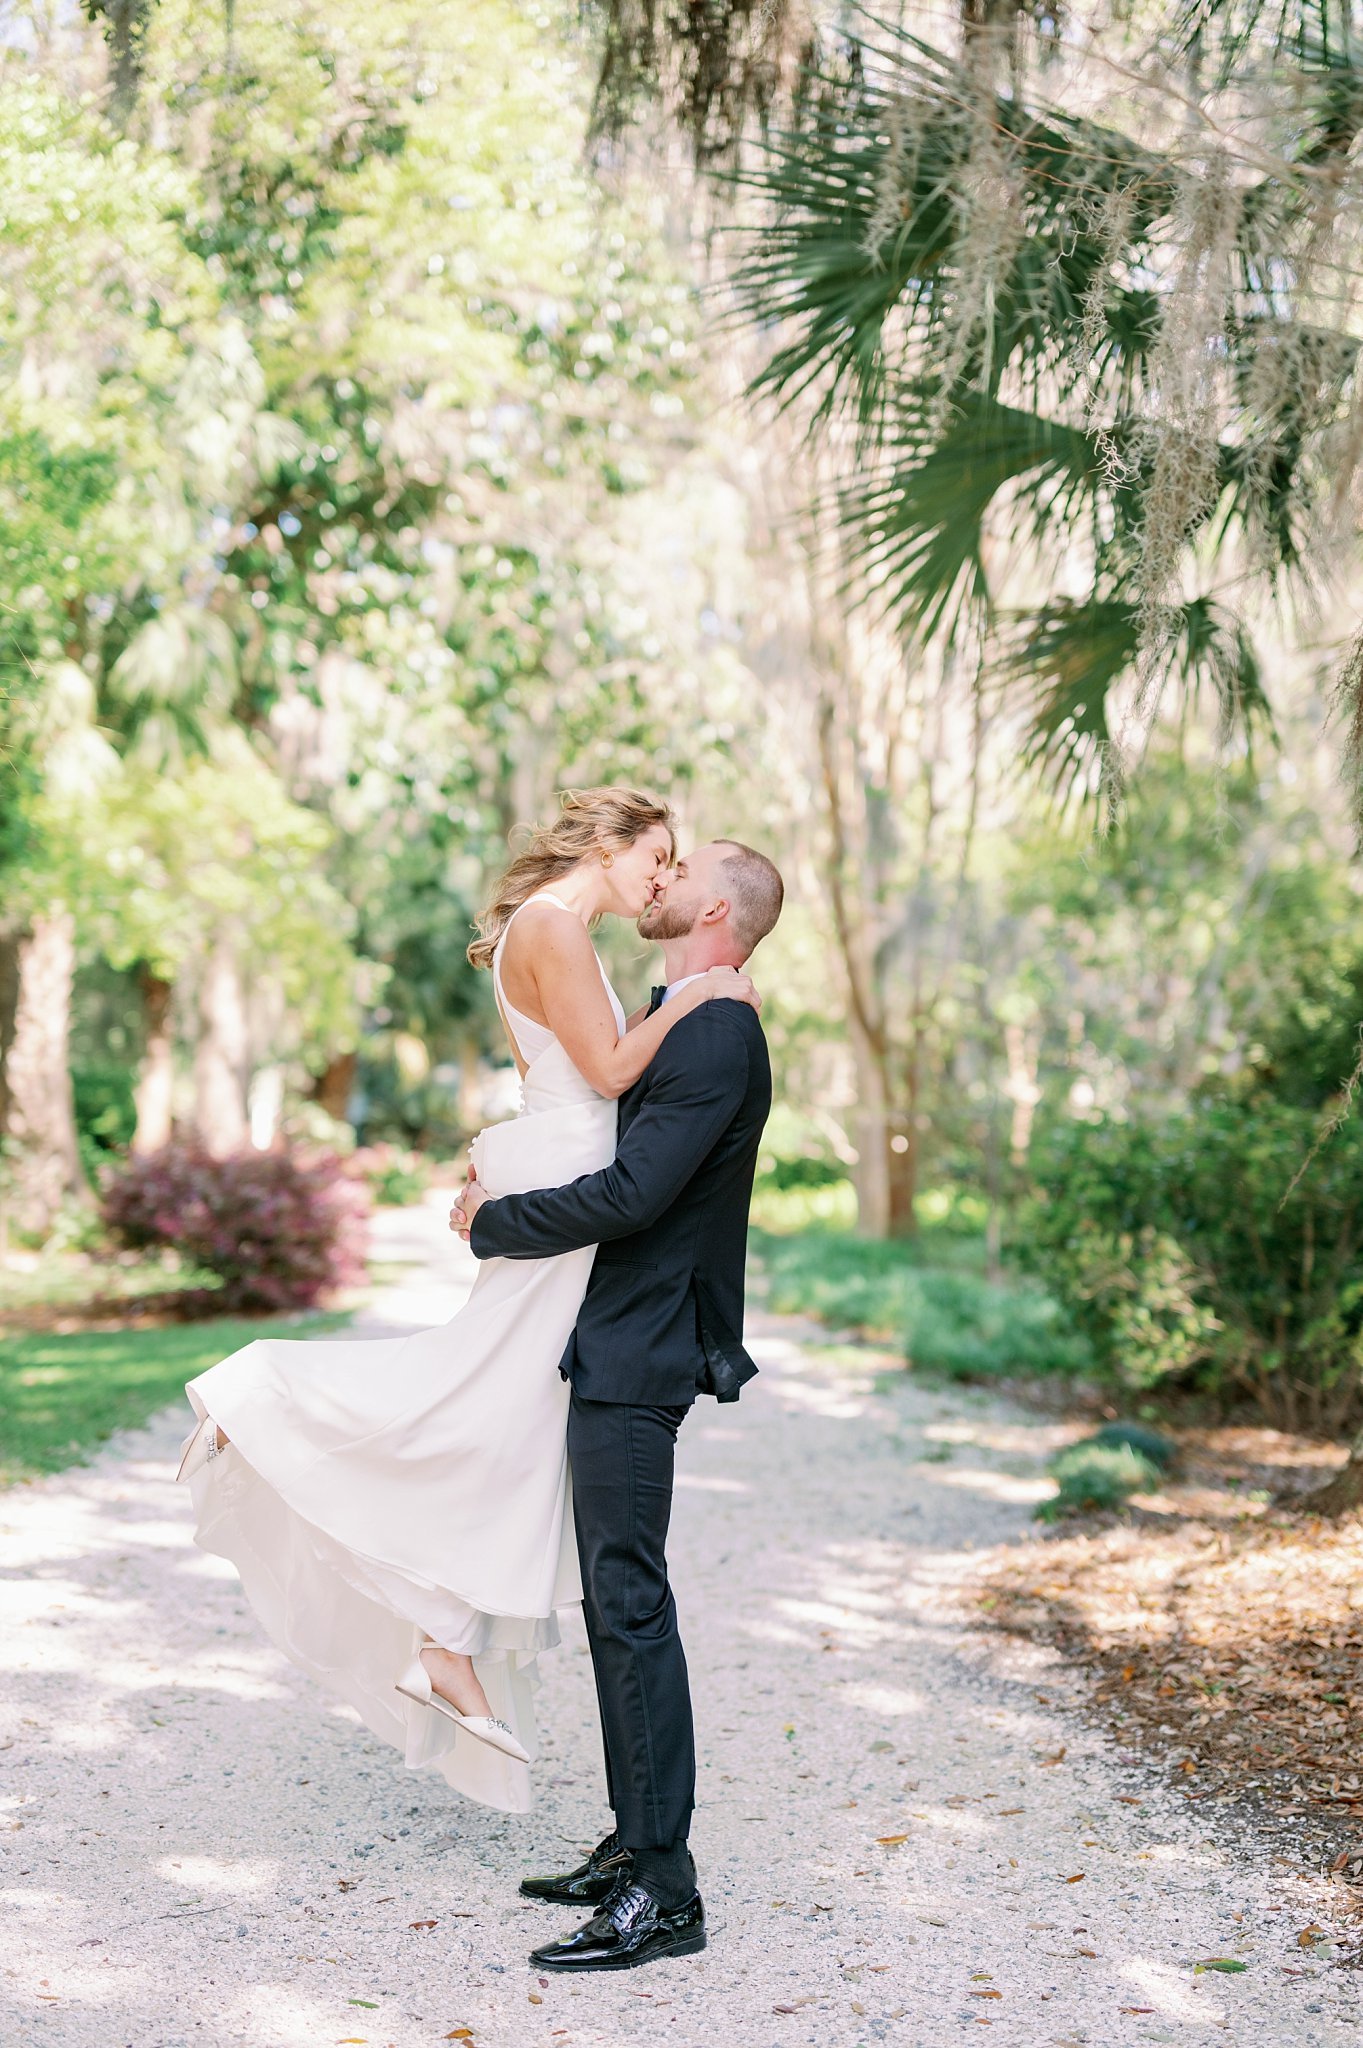 Kayla Nelson Photography is one of the top wedding photographers in Beaufort SC dedicated to providing wedding couples with beautiful wedding photography in South Carolina.